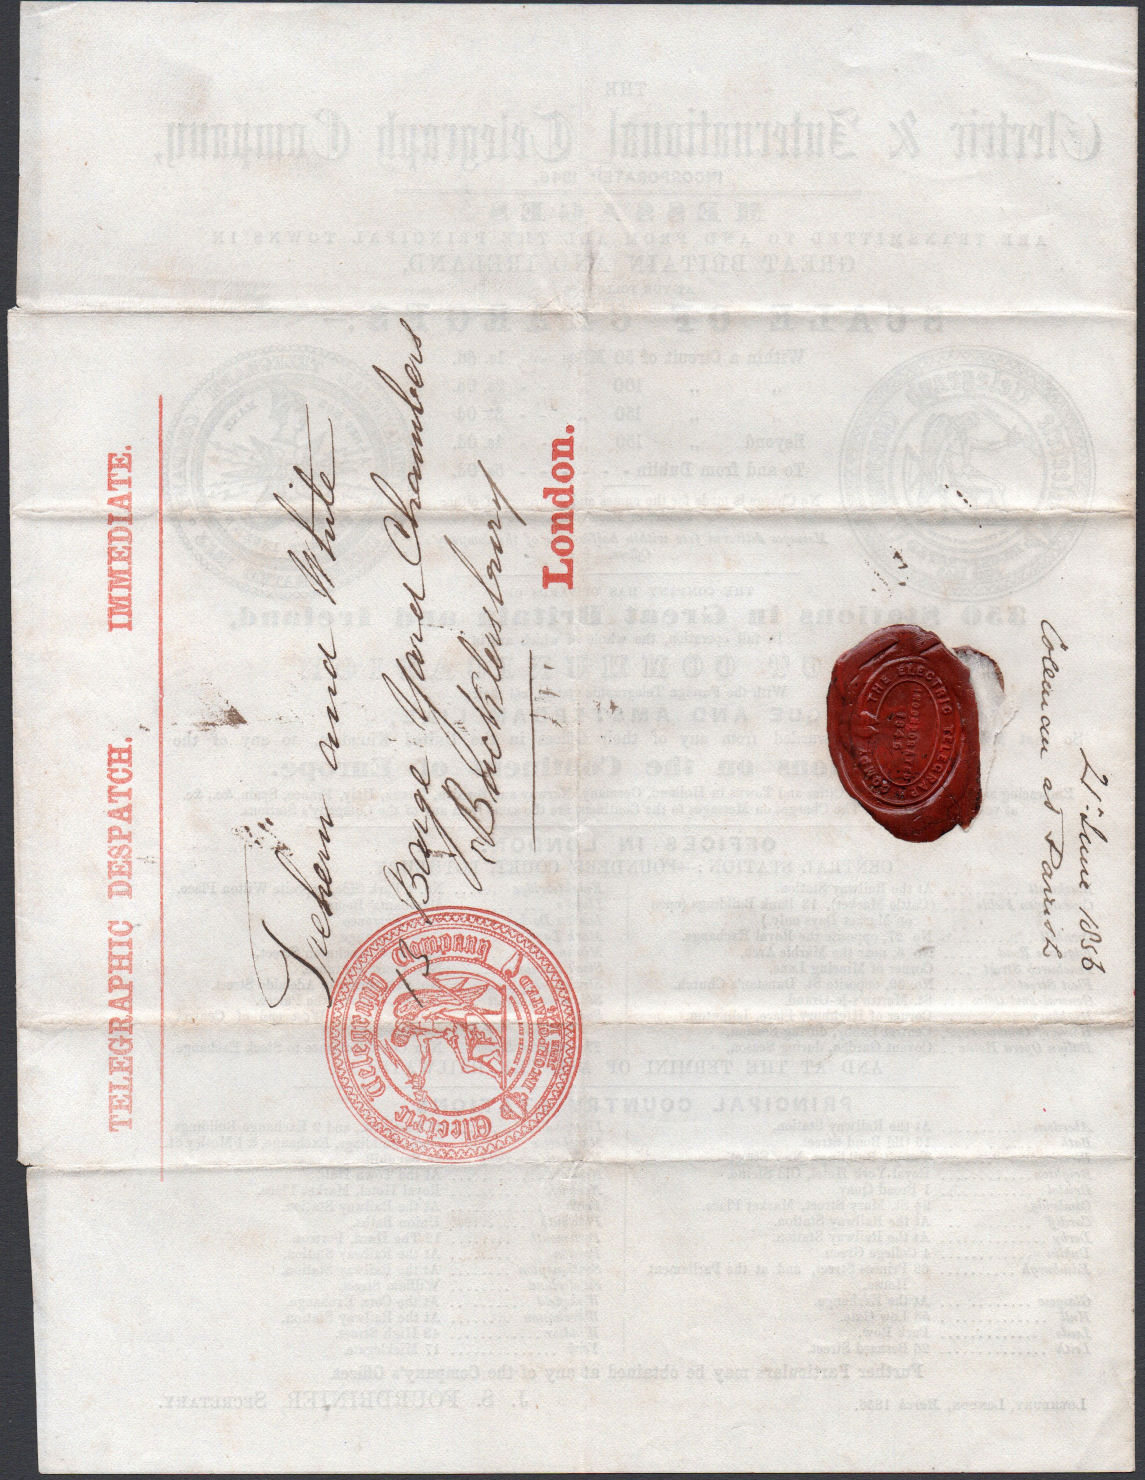 Electric Telegraph Company Stationery 1856 - back.